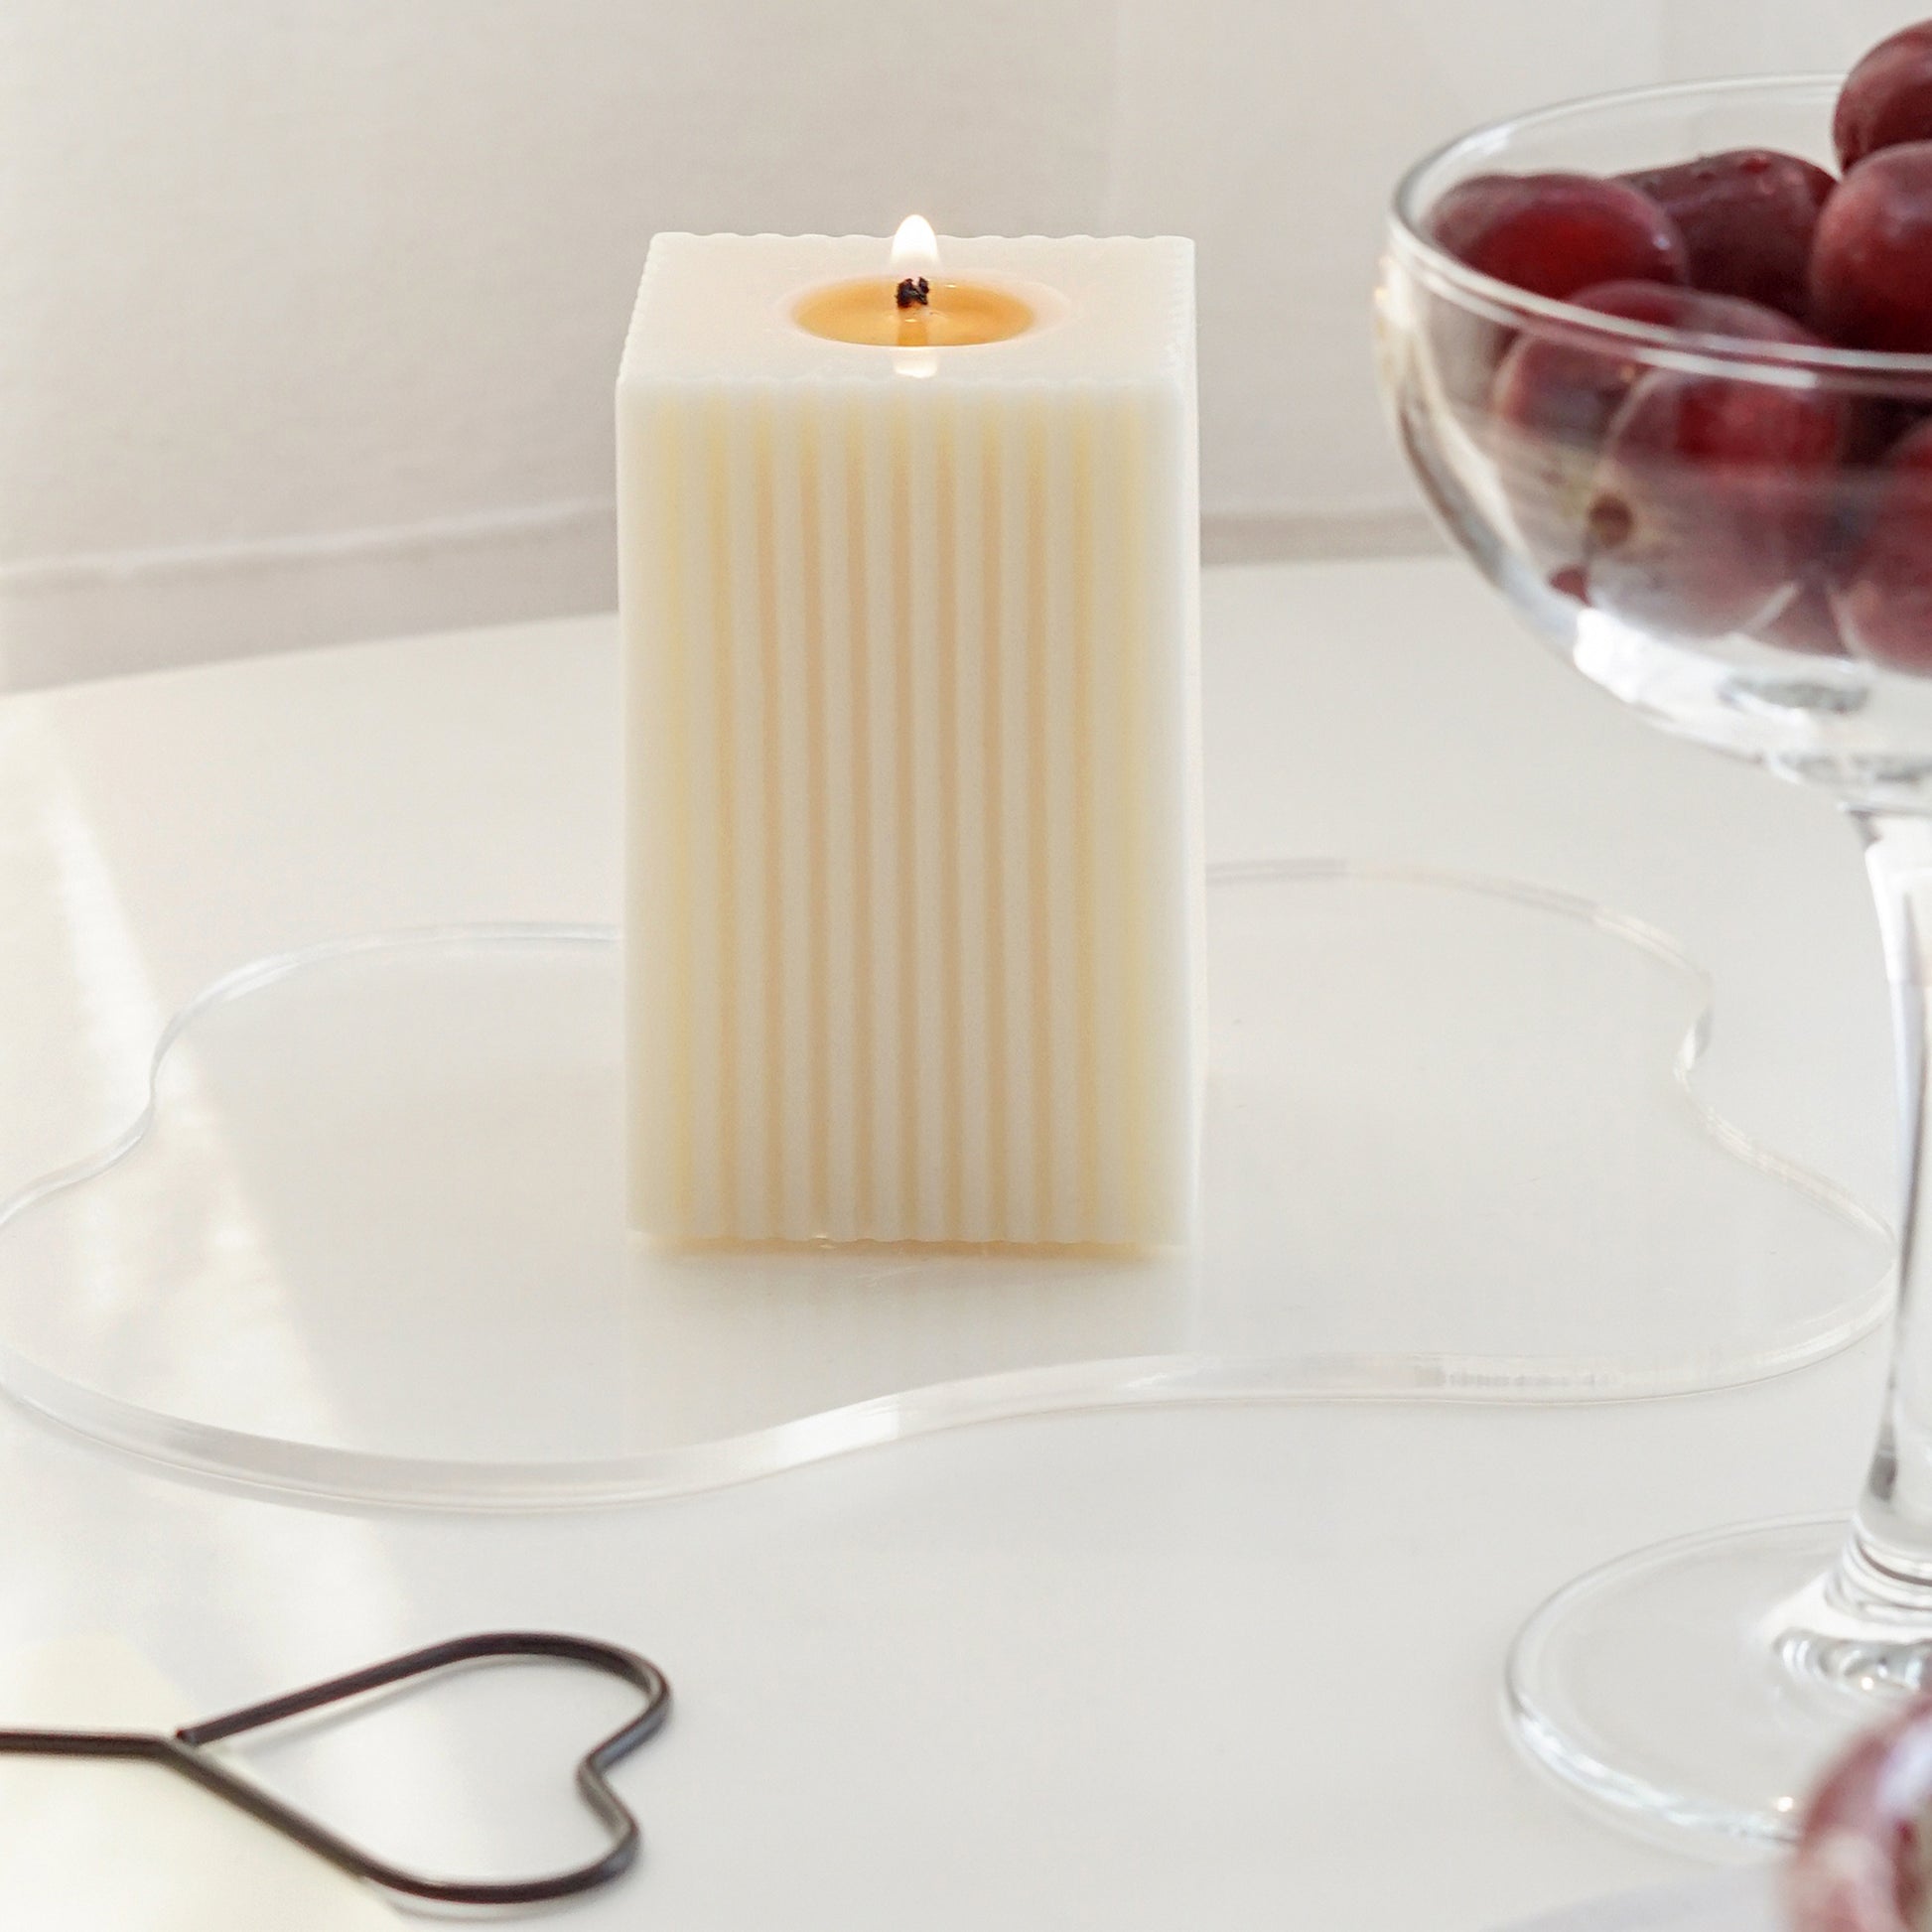 lit square ribbed pillar soy candle on a clear wavy acrylic coaster, a heart shaped candle wick dipper, and a clear coupe glass filled with red cherries on the white round table